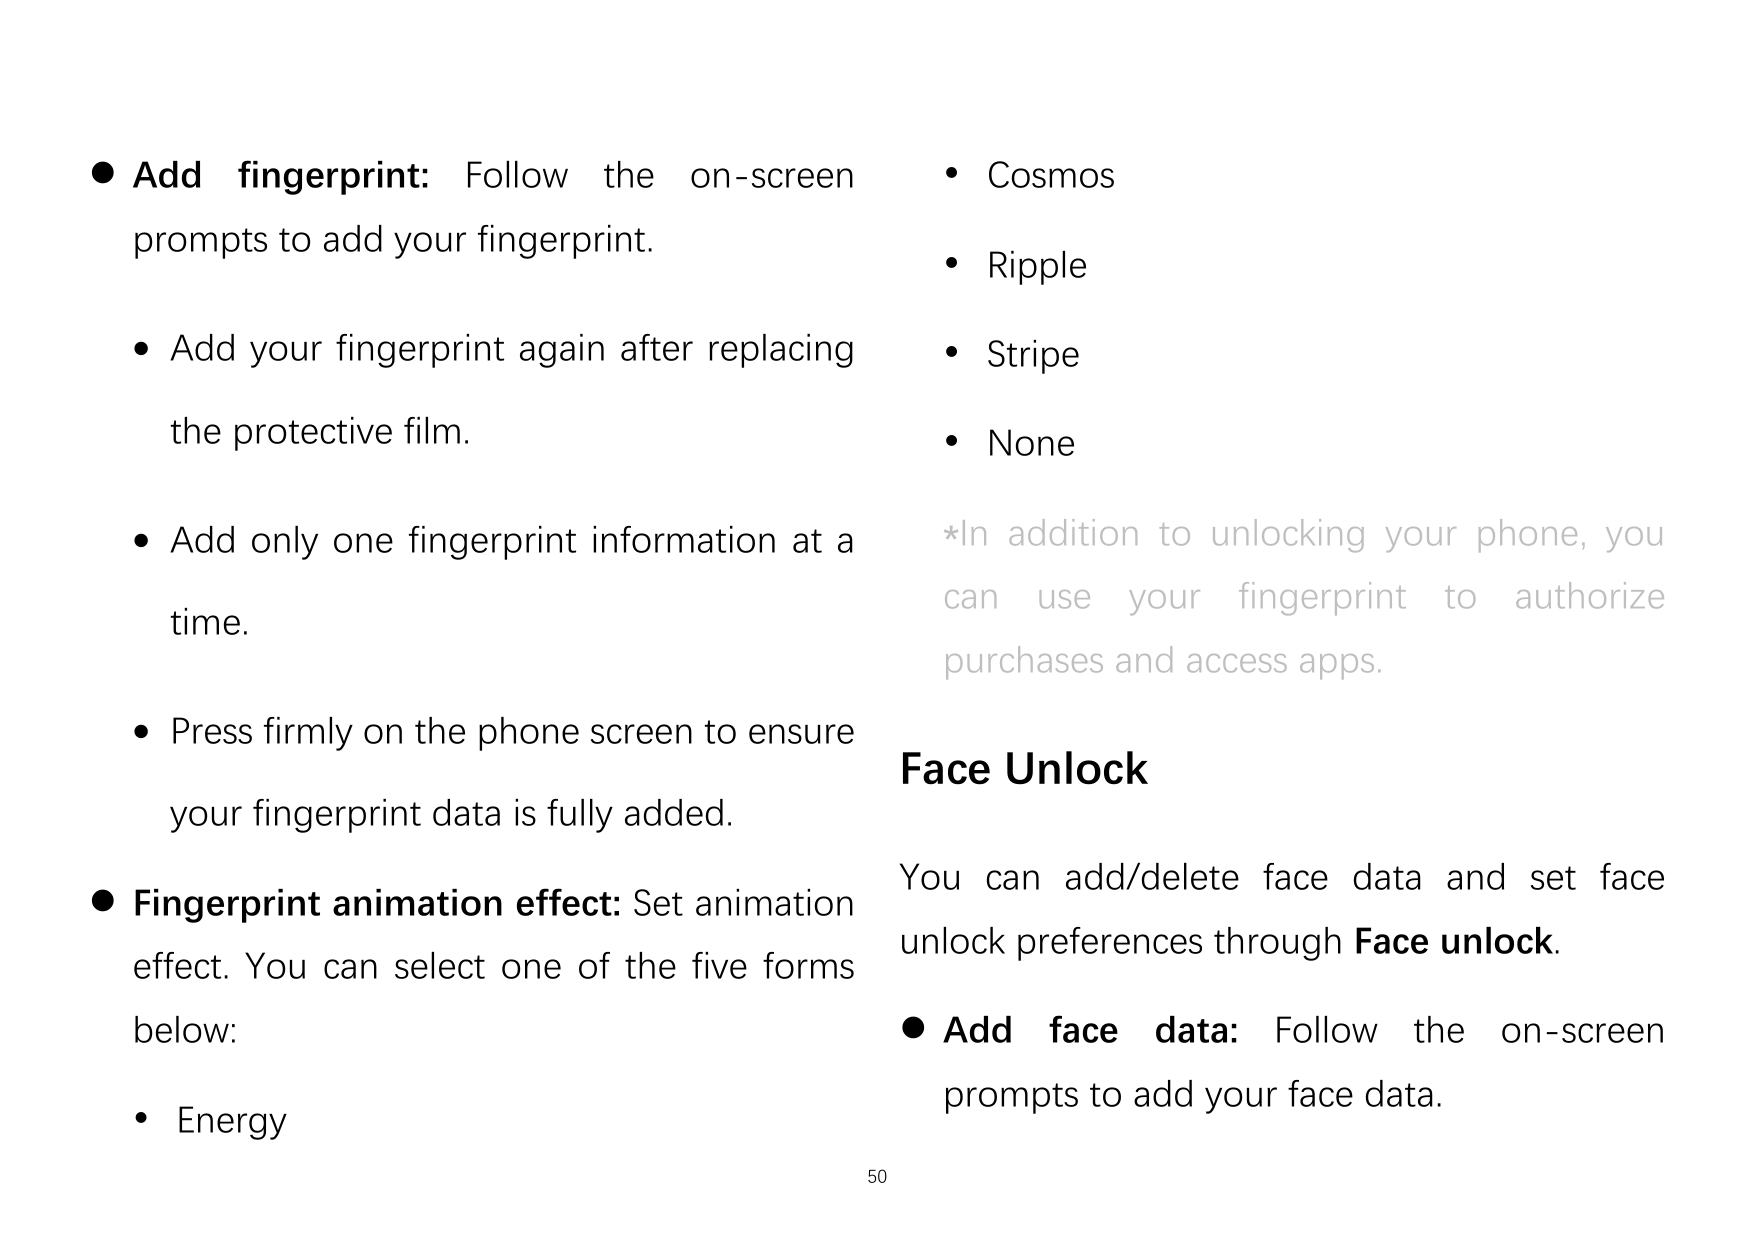  Add fingerprint: Follow the on-screen Cosmosprompts to add your fingerprint. Ripple Add your fingerprint again after replac